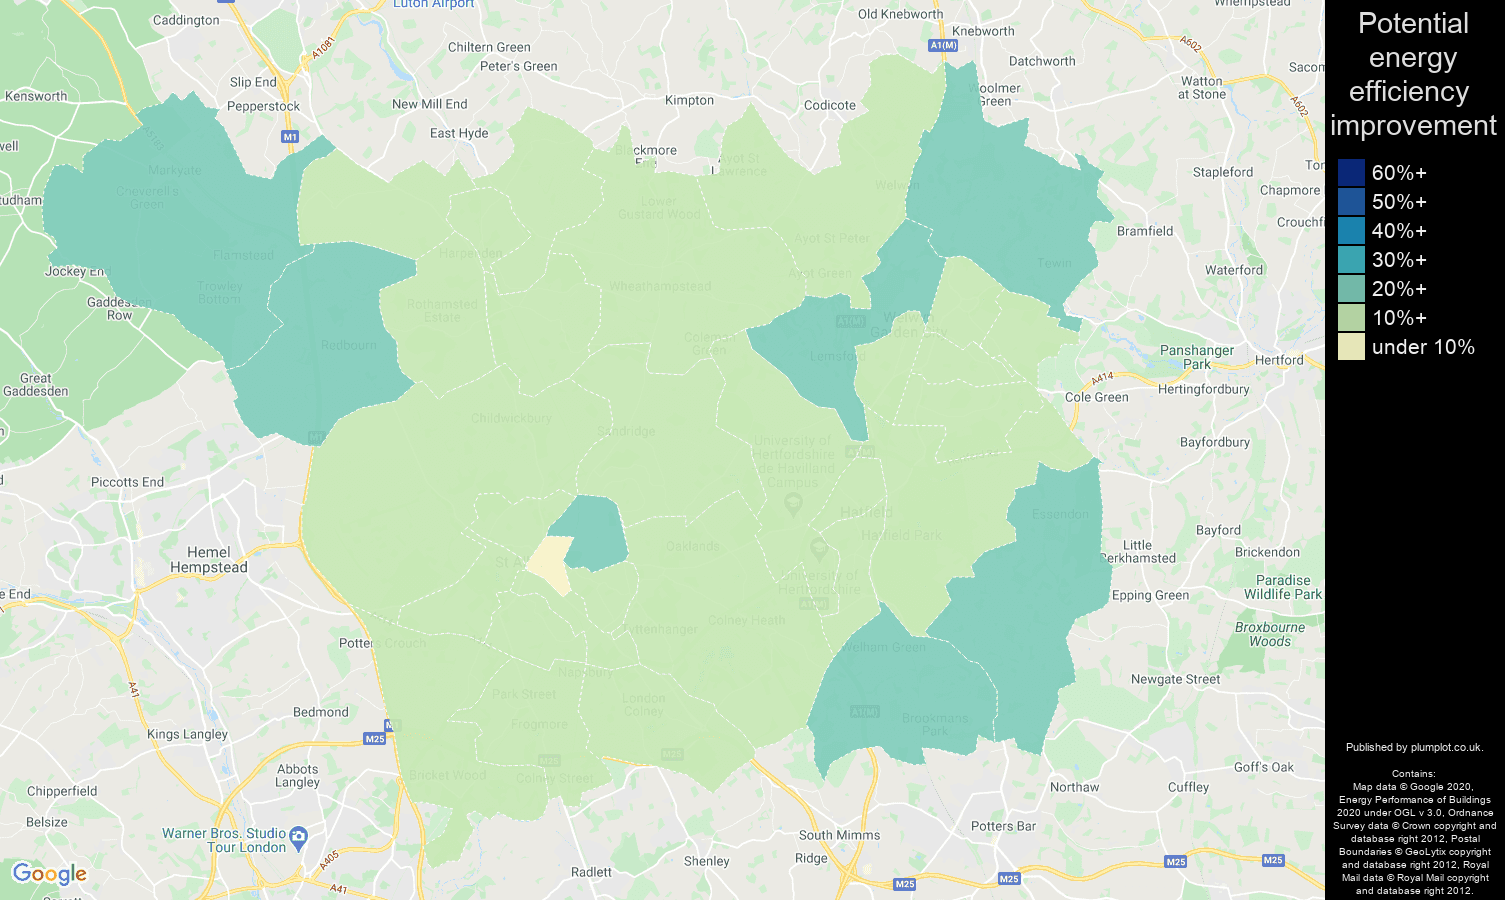 St Albans map of potential energy efficiency improvement of properties